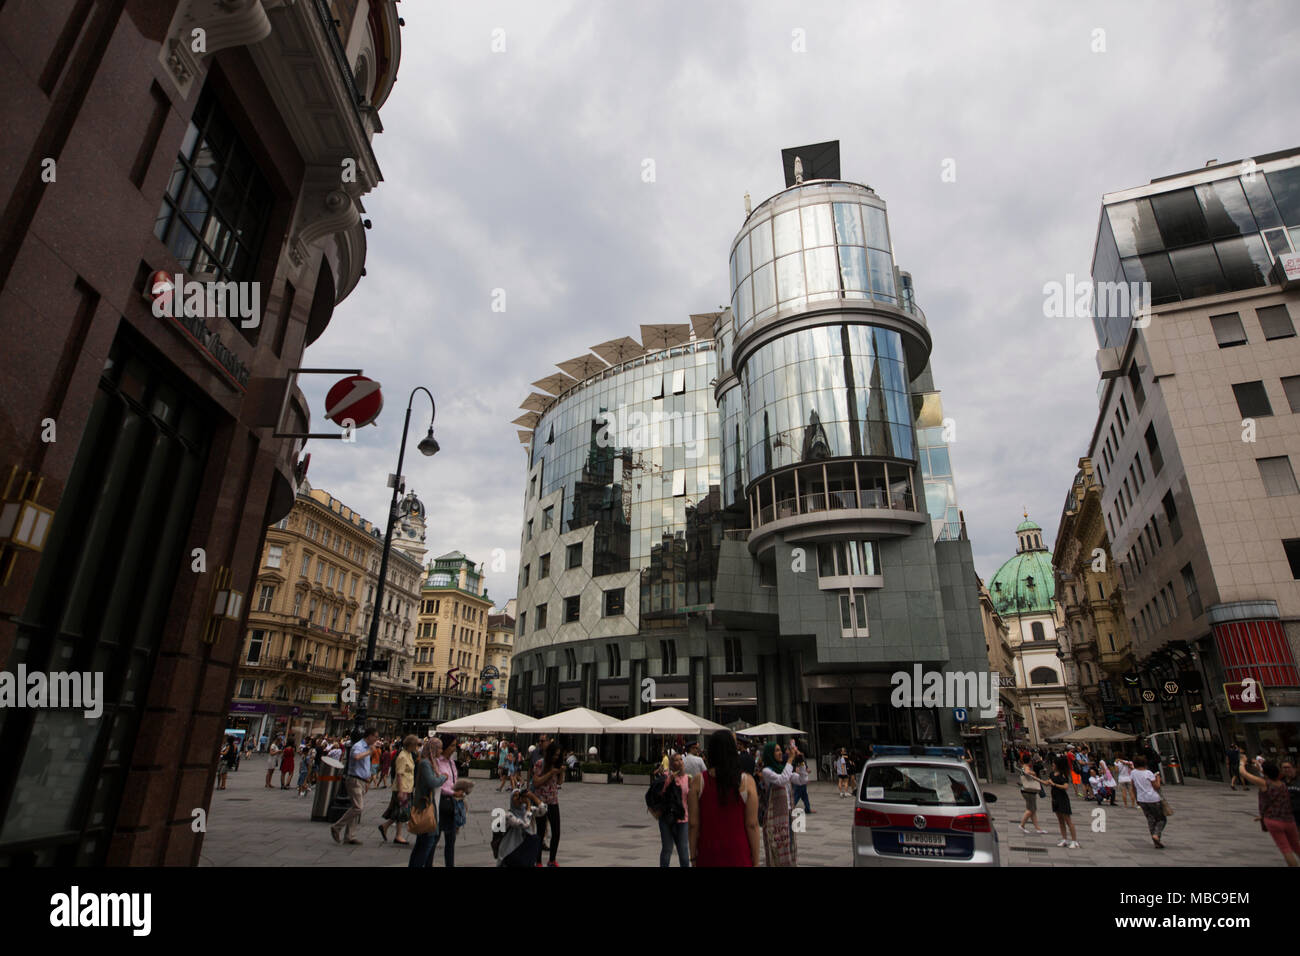 The DO&CO Hotel at Stephansplatz, across from St Stephen's Cathedral, in Vienna, Austria. Stock Photo